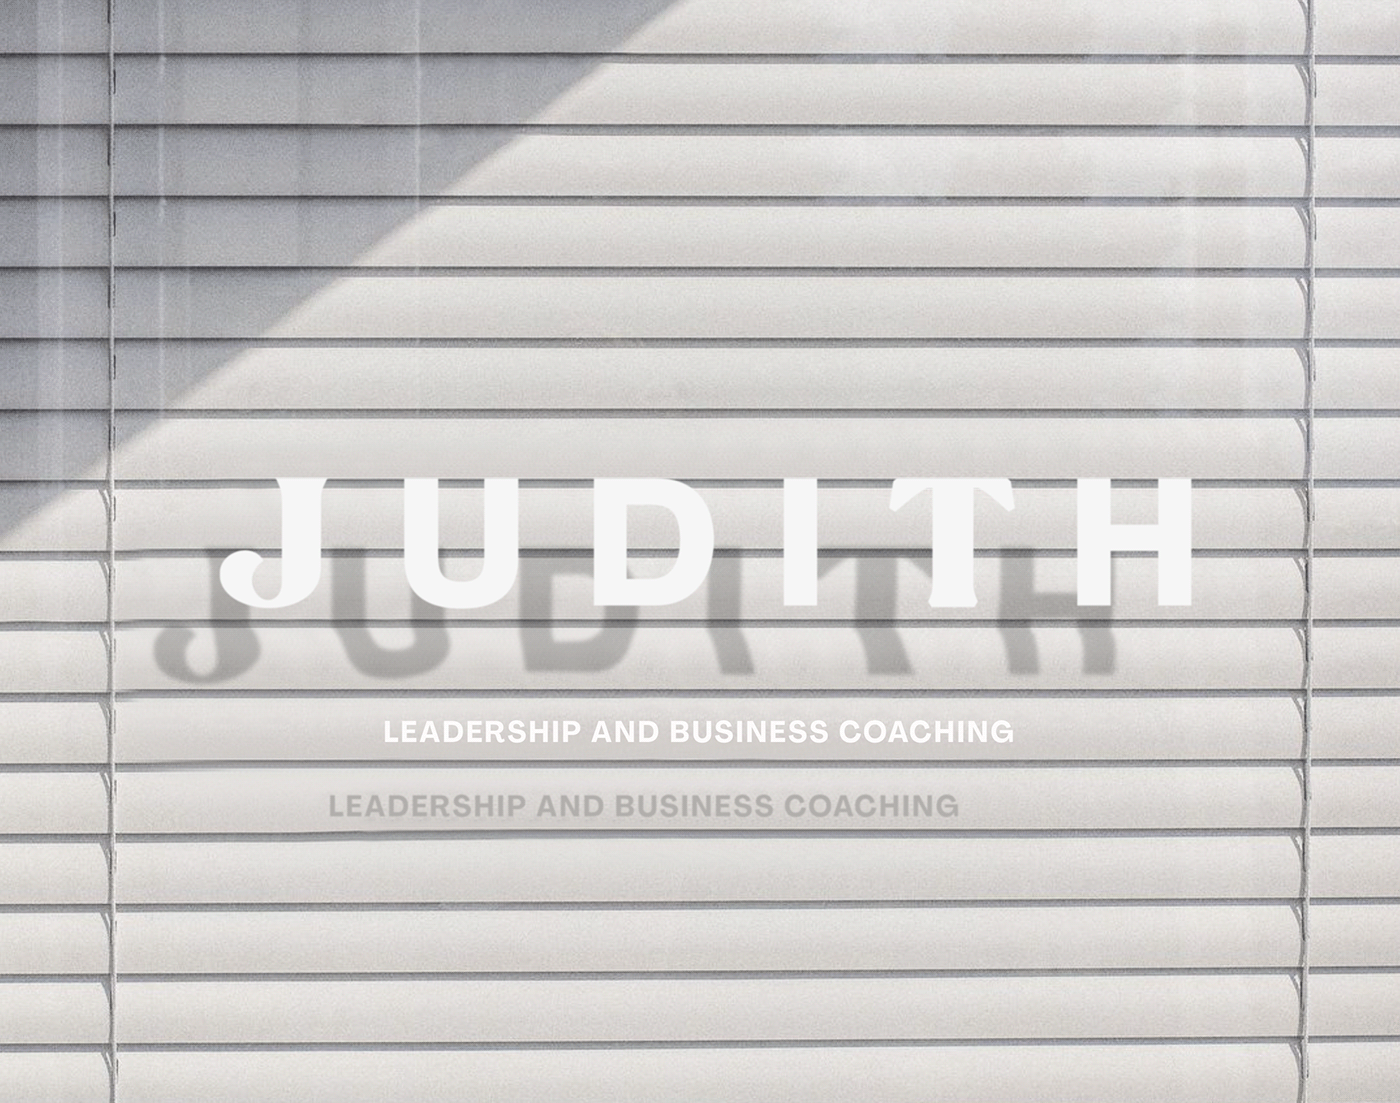 artifact from the Embracing Hardships in Branding for Leadership Coach Judith article on Abduzeedo